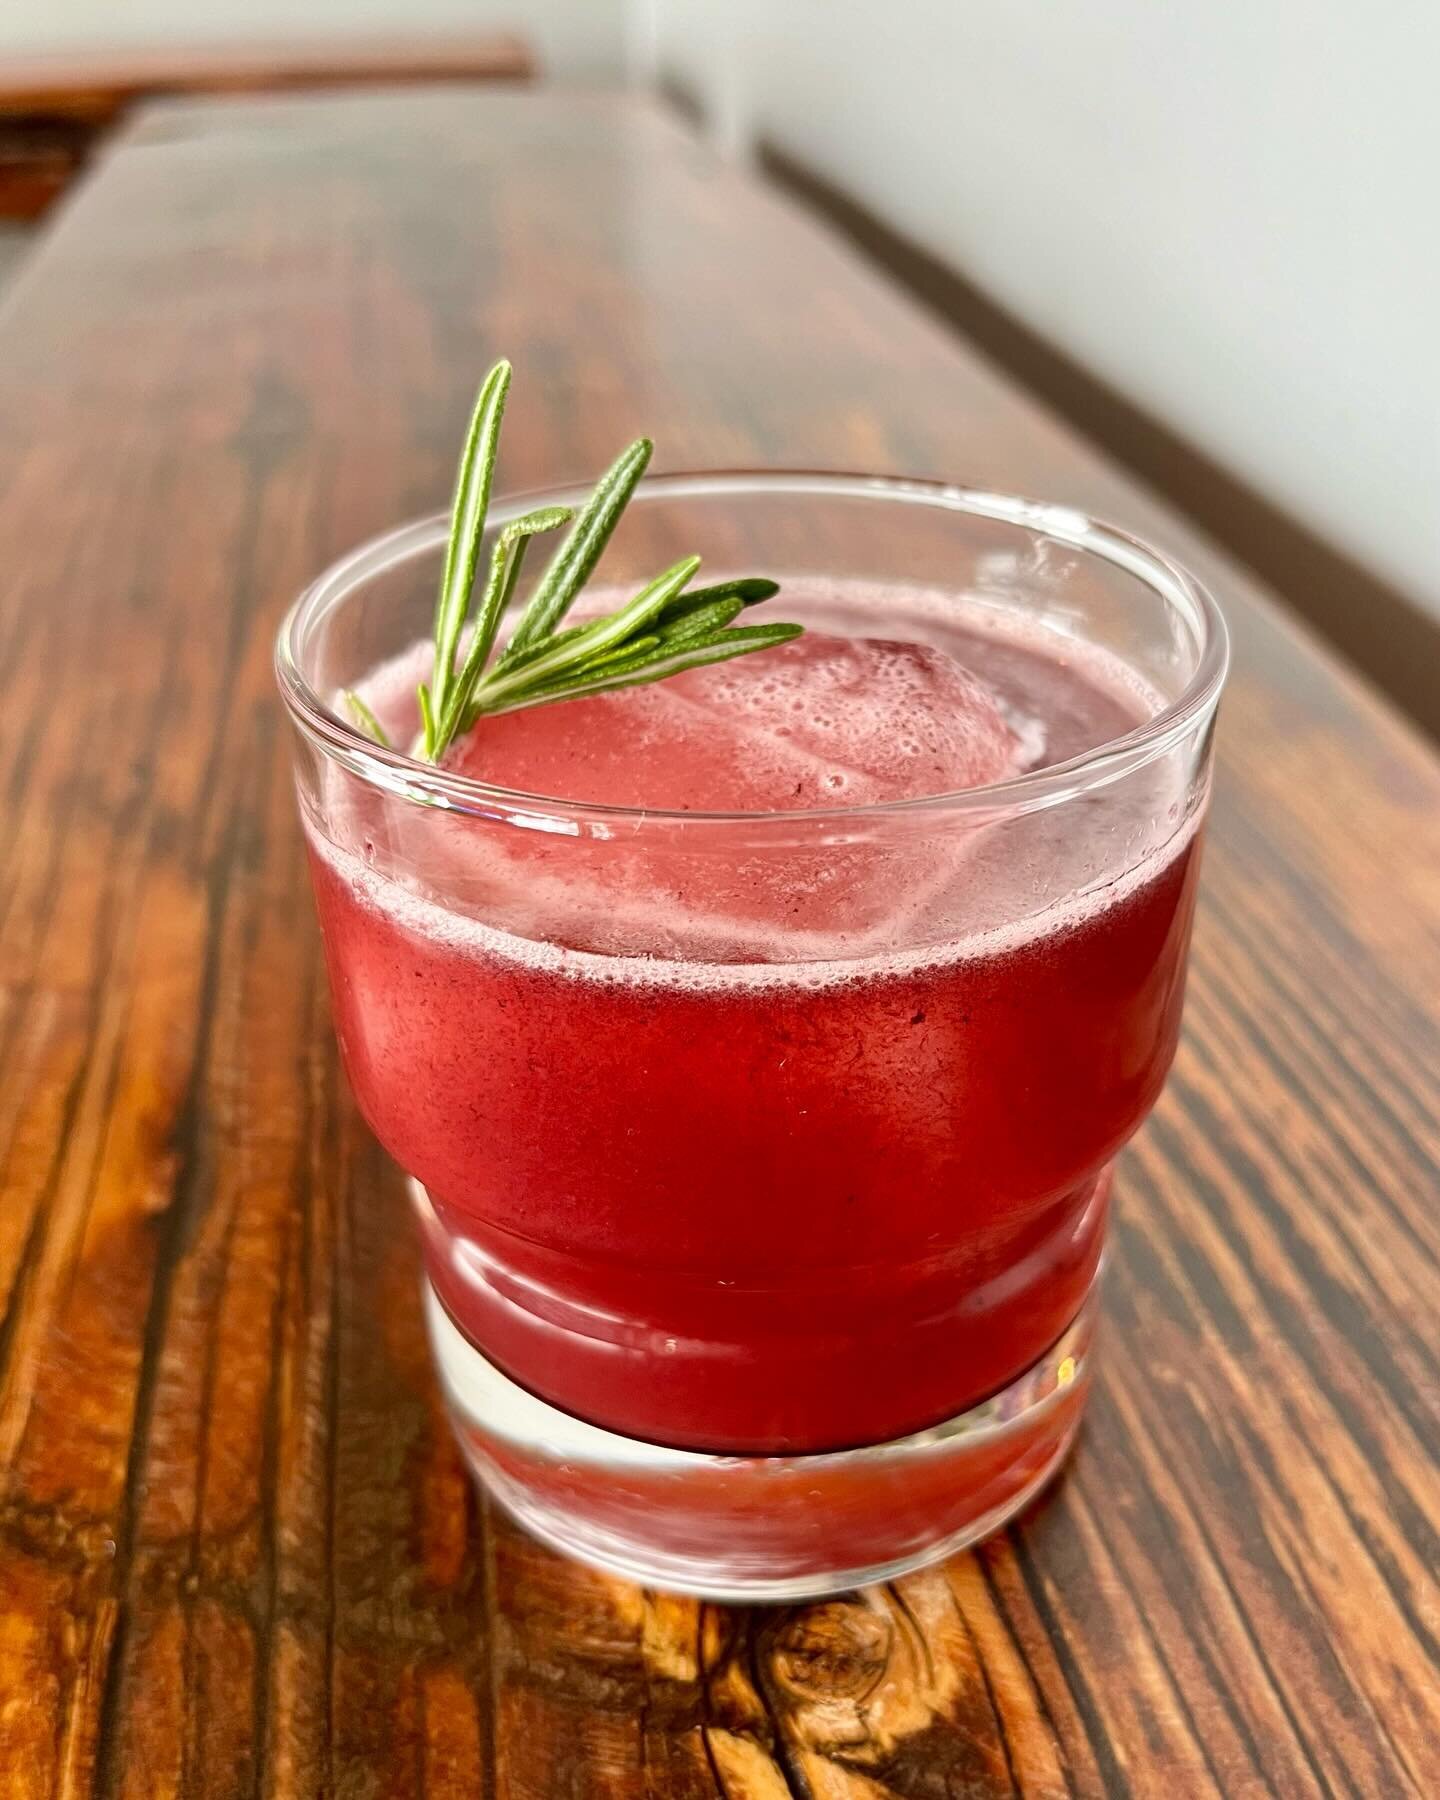 A new special hitting the bar today: The Berry Bourbon Smash🥃✨ 

Delicious and bright flavors of Straight Bourbon Whiskey &bull; Blackberry &bull; Rosemary &bull; Maple &bull; Lemon

#elevation5003distillery #elevatingspiritslocally #craftcocktails 